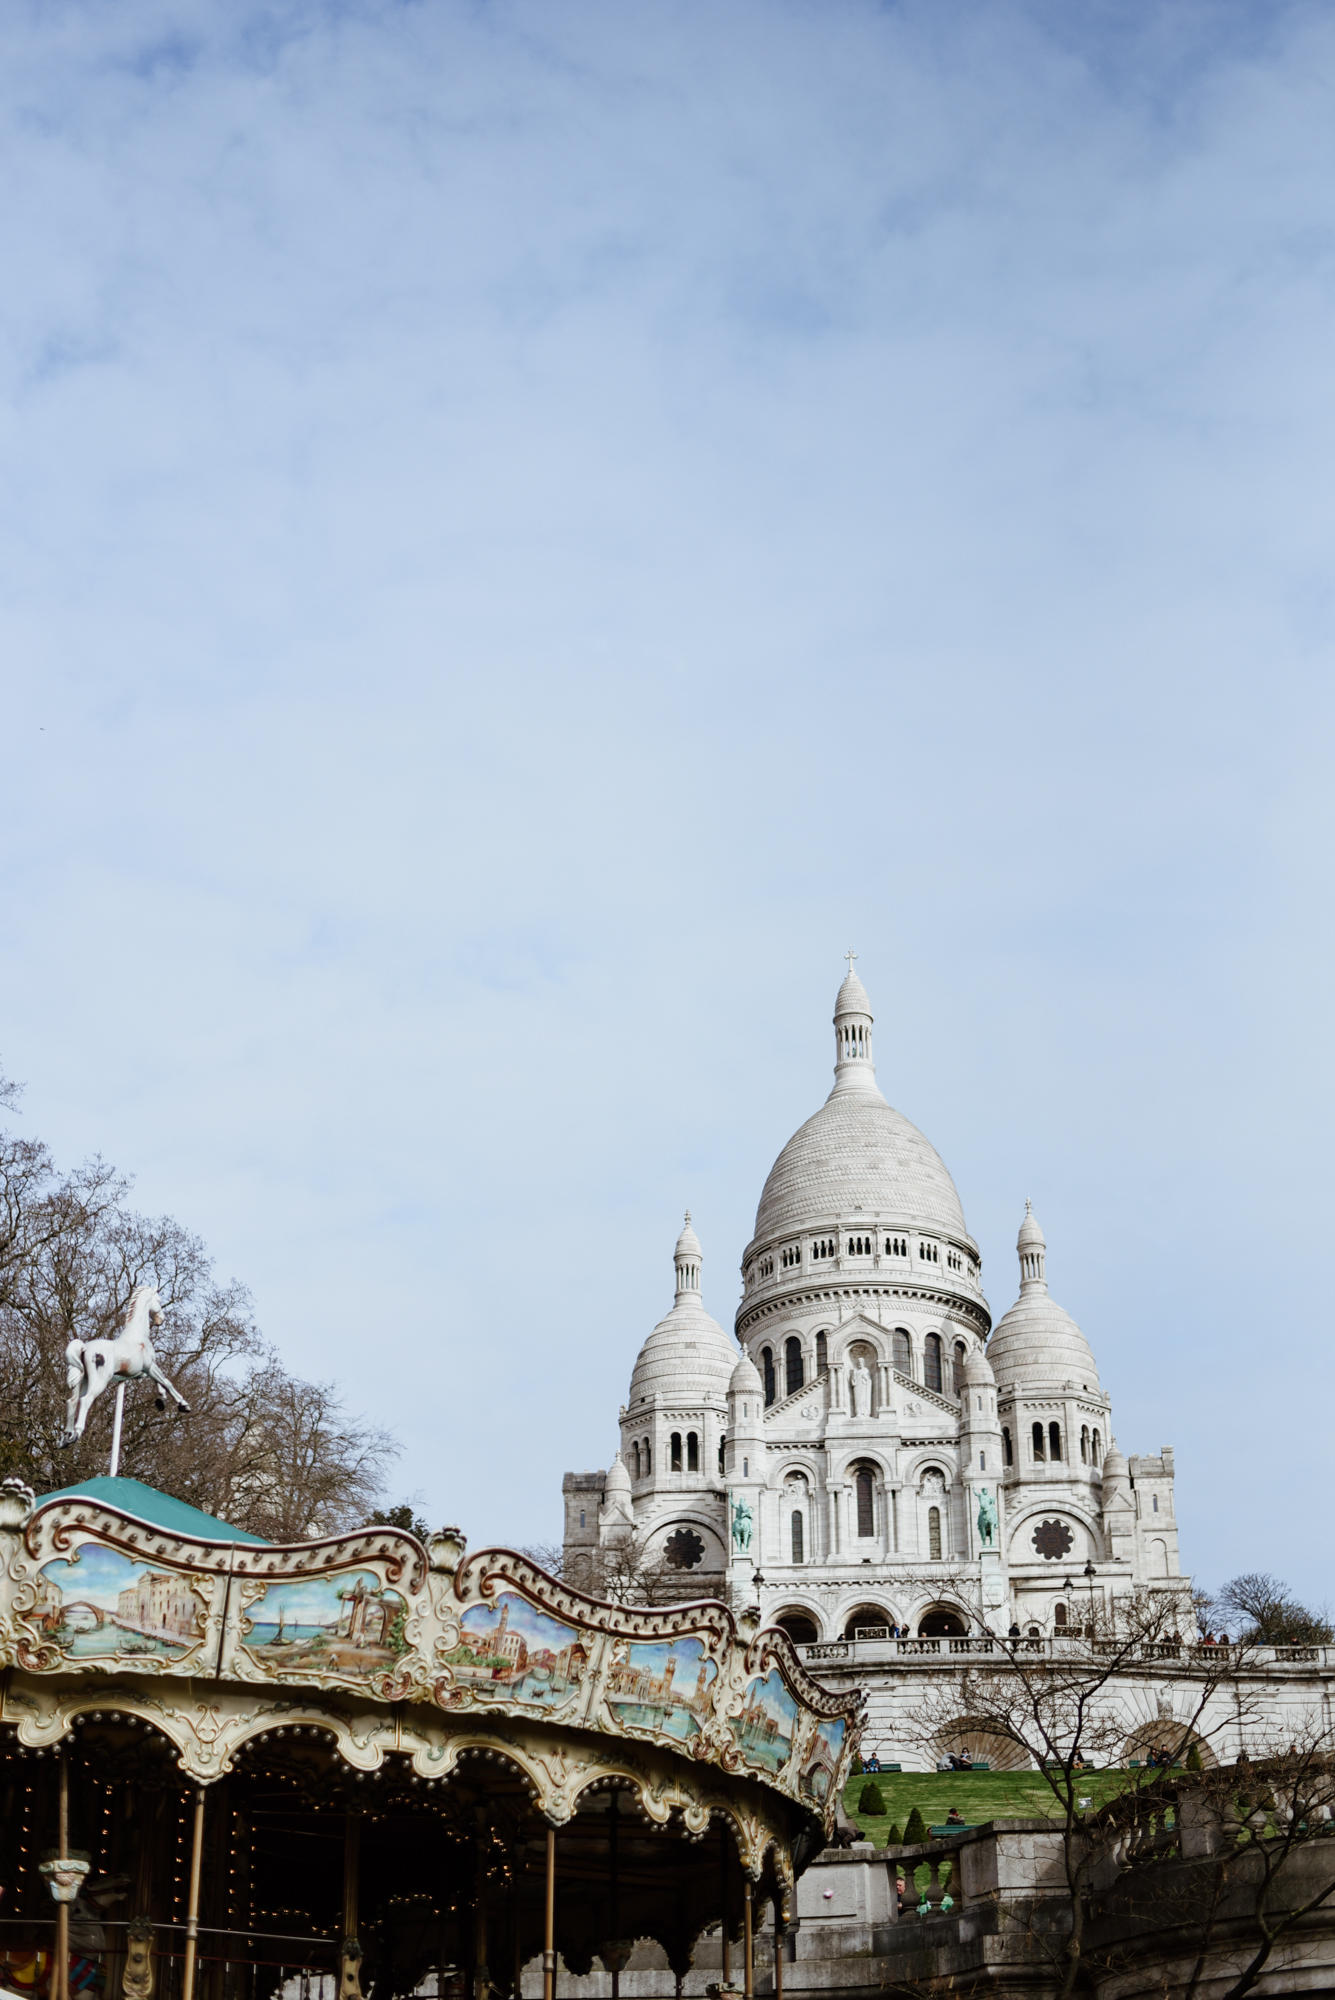 old carousel and basilique sacre coeur in paris